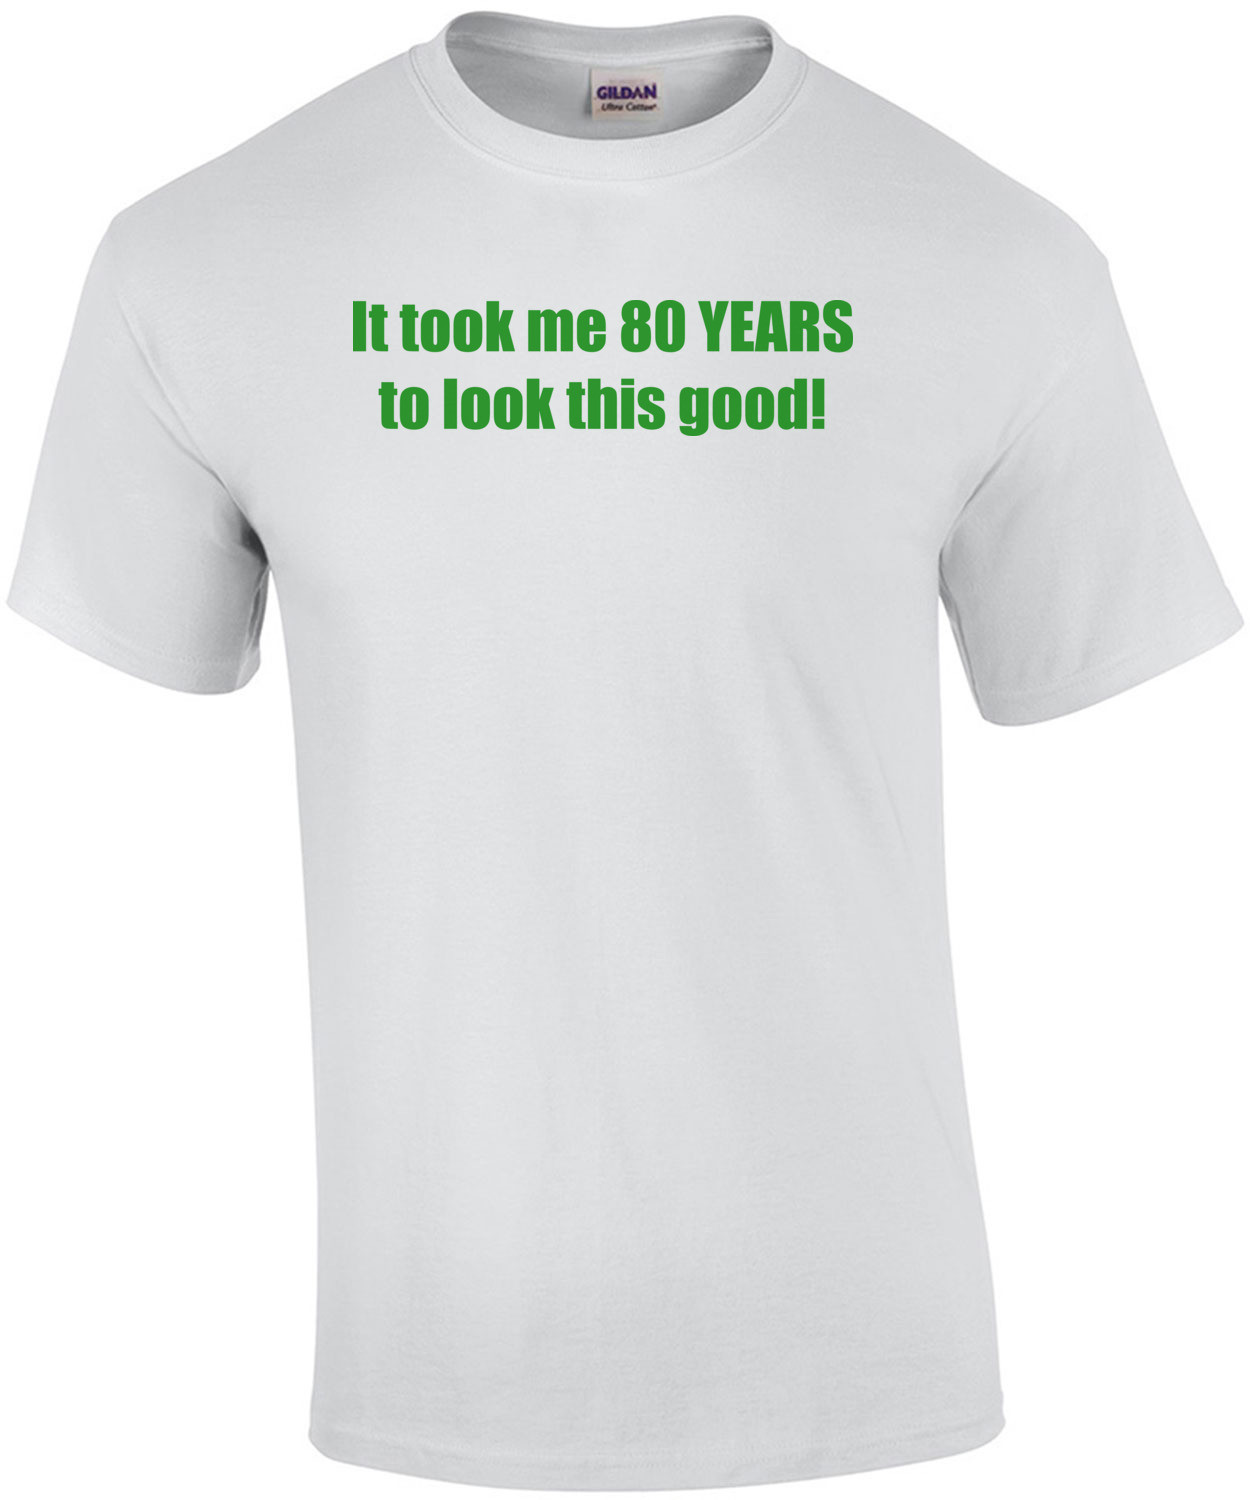 It took me 80 YEARS to look this good! - Happy Birthday Shirt